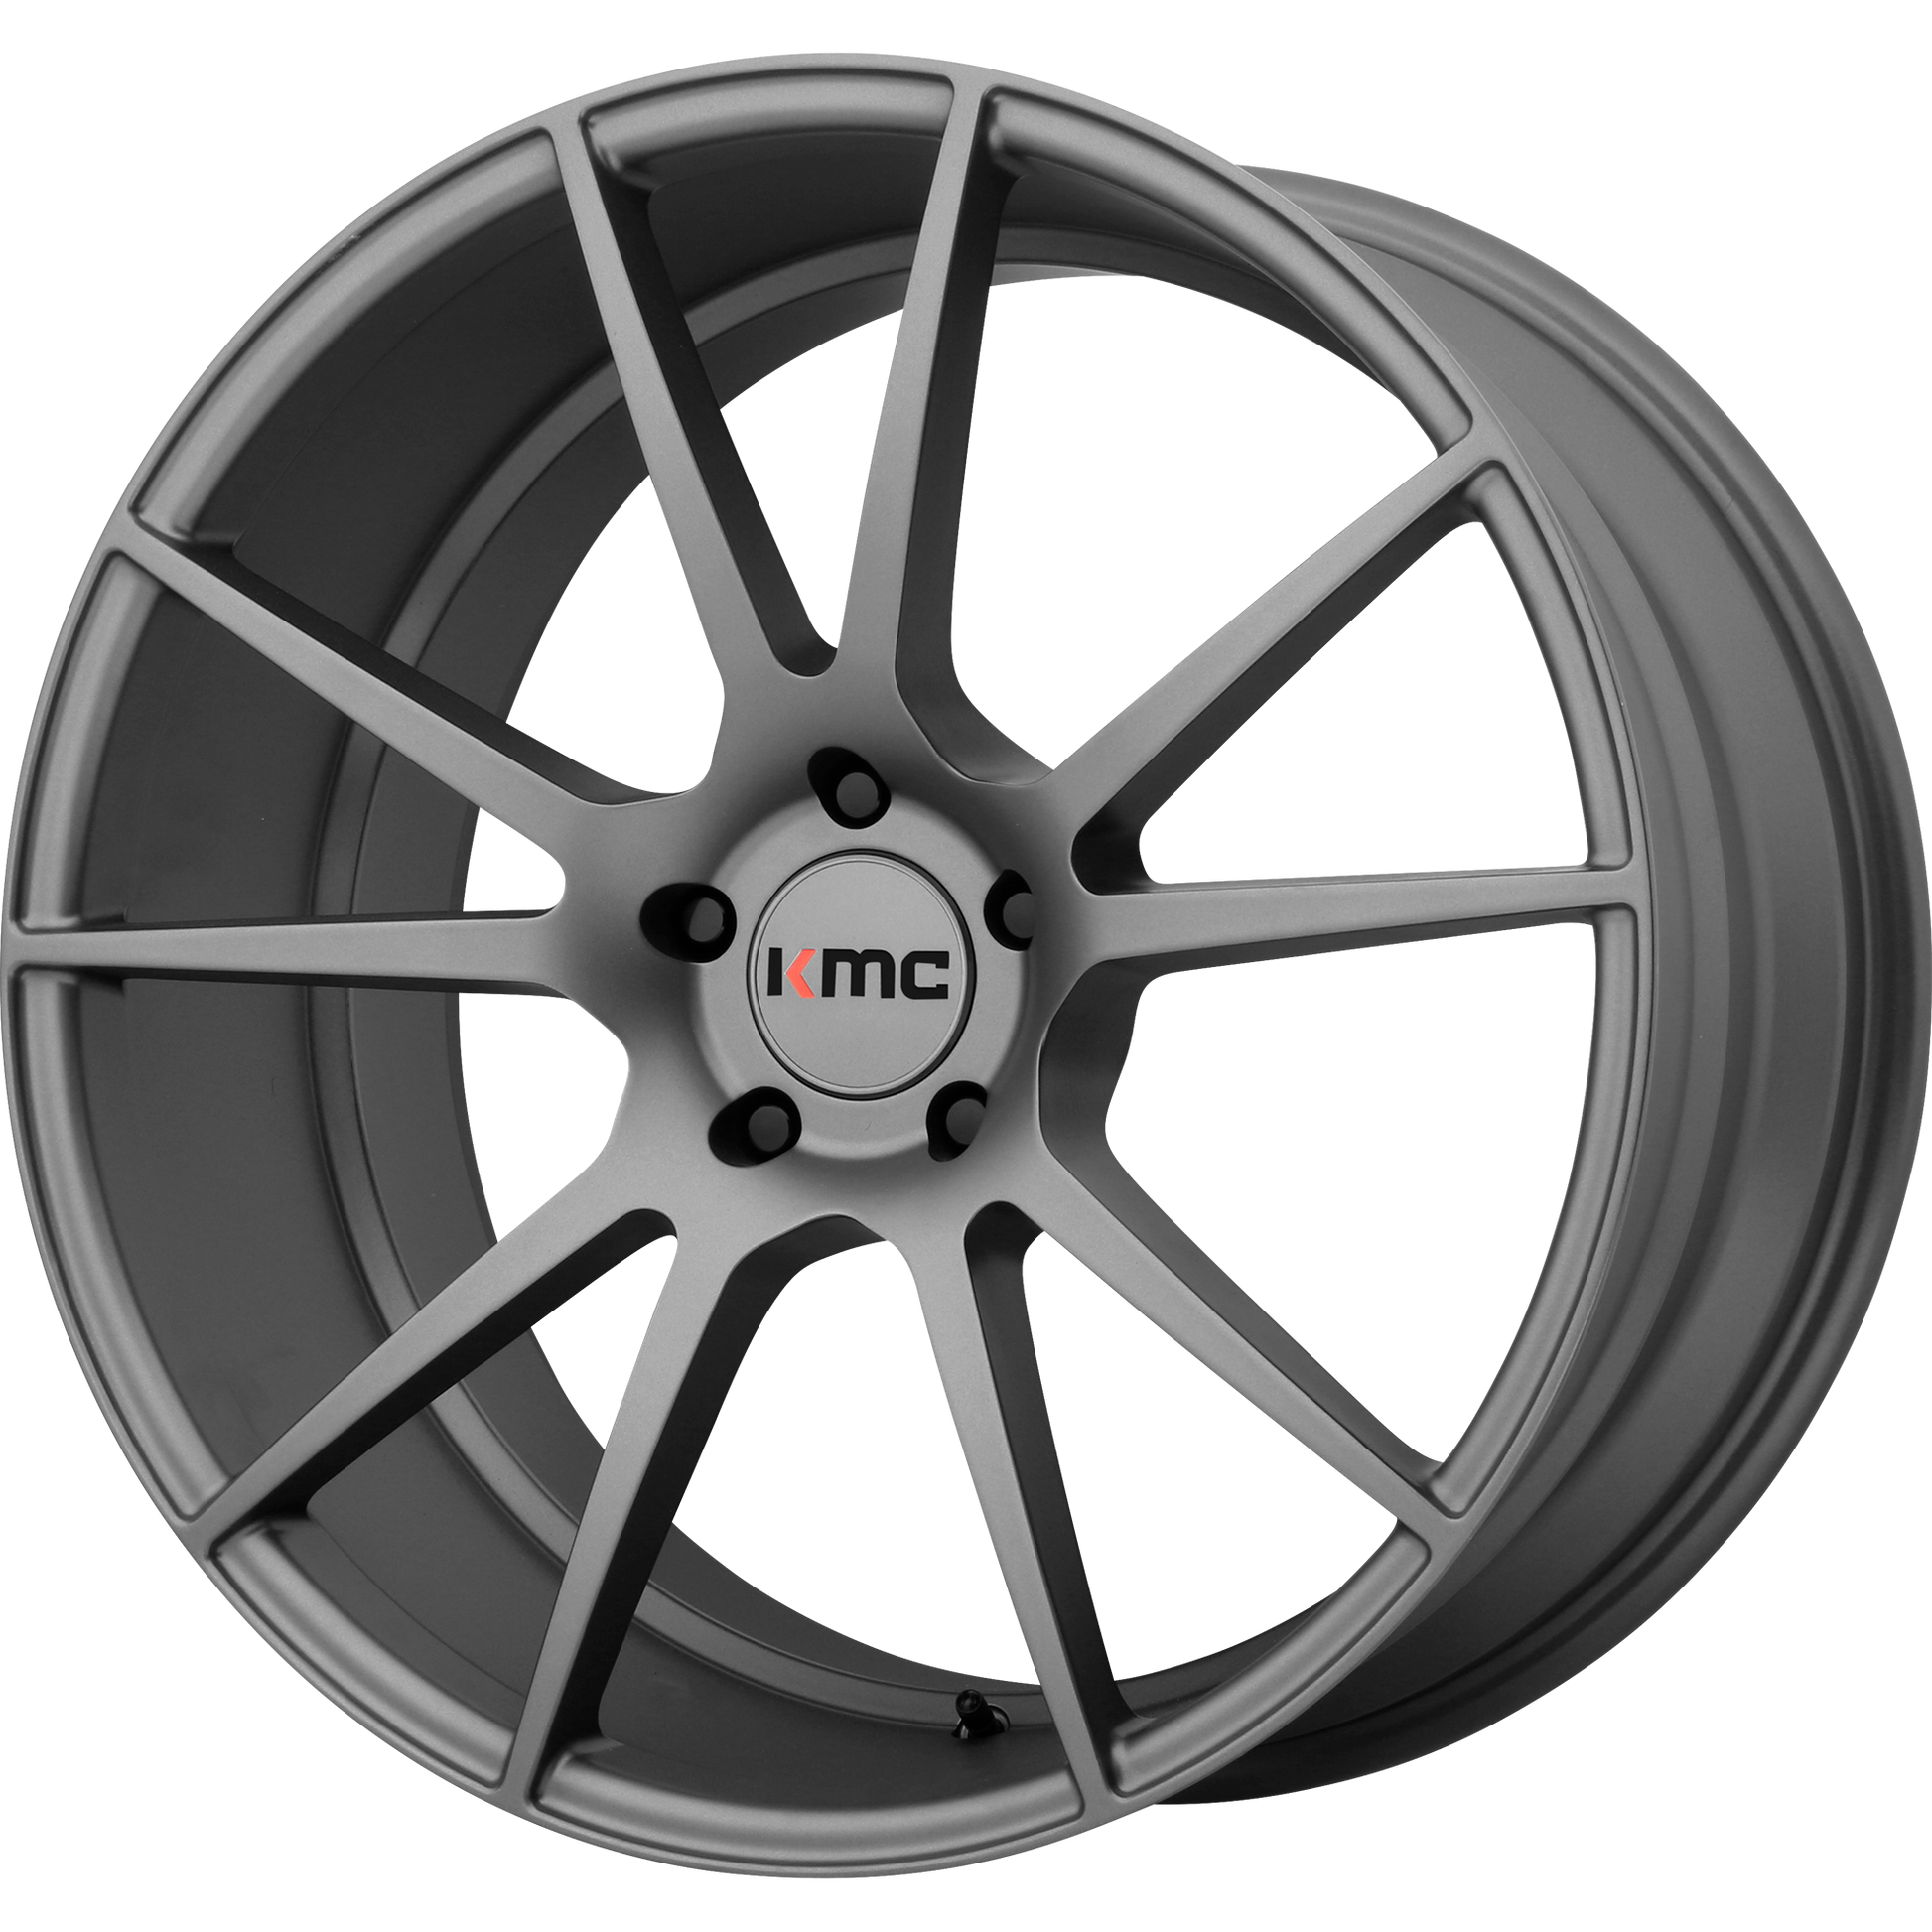 Kmc Km709 Flux 20x8.5 20x8.5 35 Offset In Charcoal